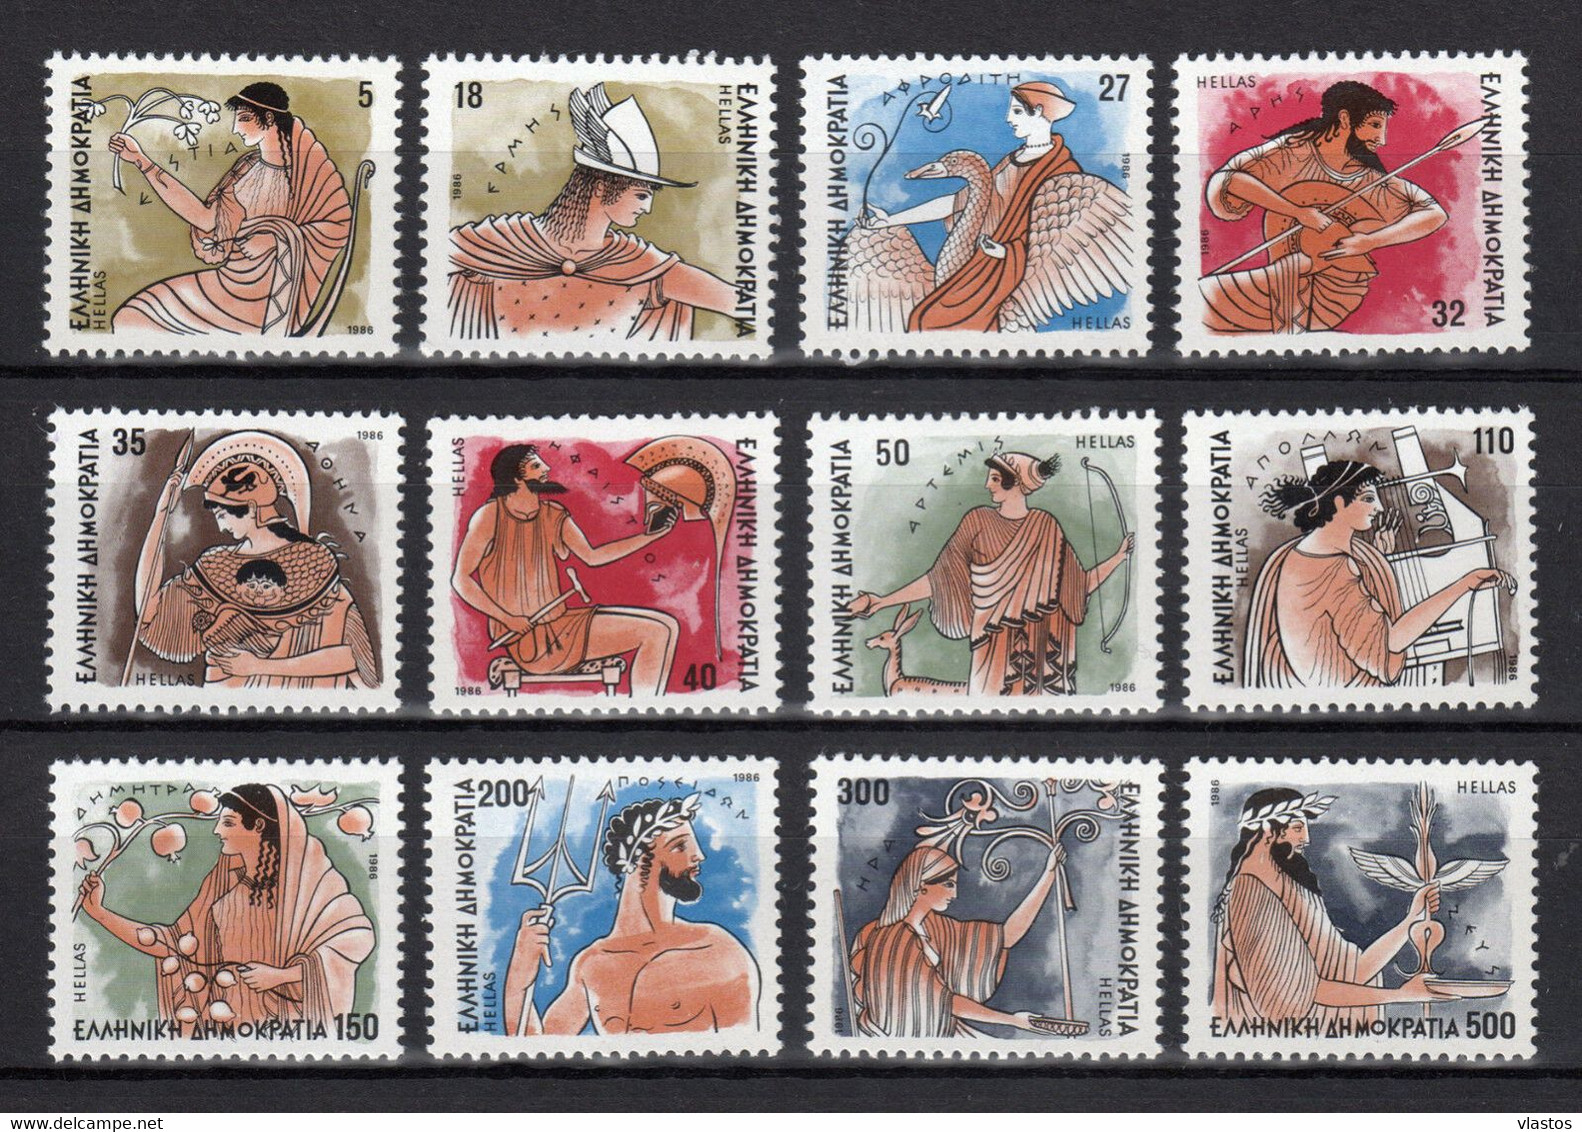 GREECE 1986 COMPLETE YEAR - PERFORATED STAMPS MNH - Années Complètes